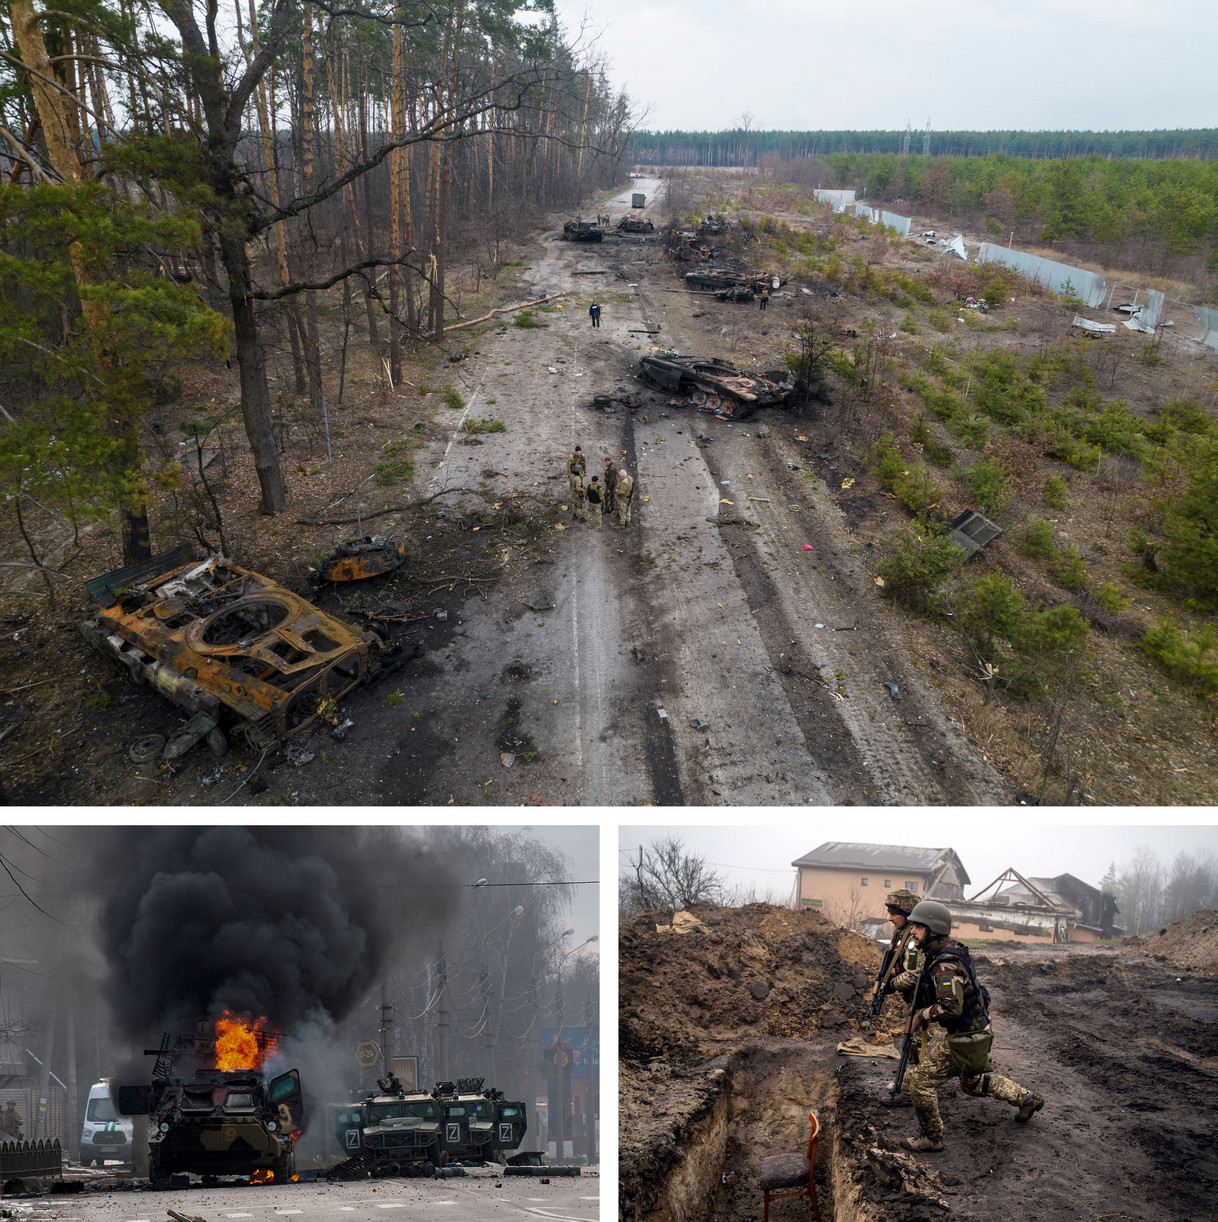 Top: Ukrainian soldiers standing amid destroyed Russian armored vehicles on a road. Right: Ukrainian soldiers inspecting trenches used by Russian soldiers. Left: A Russian armored personnel carrier burning amid damaged and abandoned light utility vehicles.